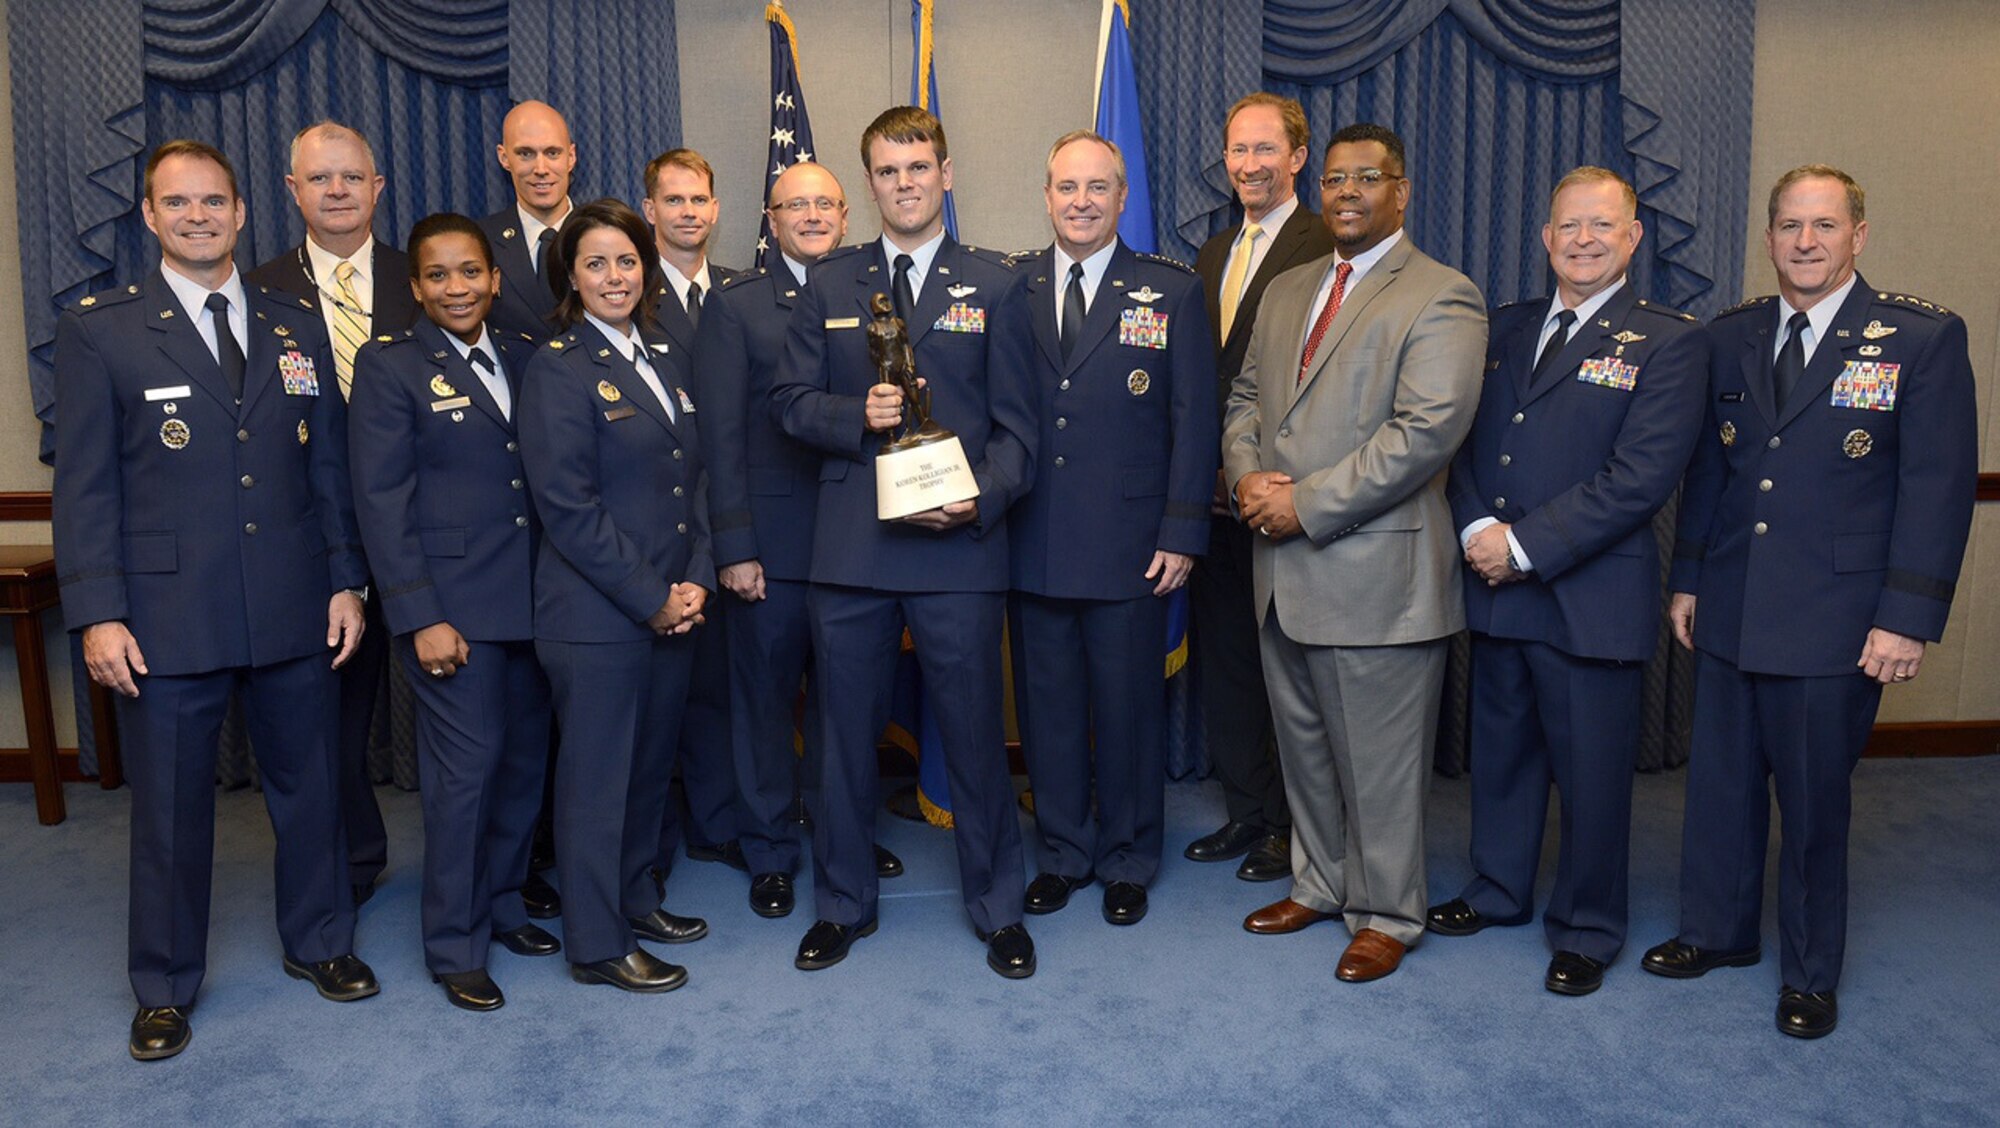 Members of the Air Force Safety program stand with Capt. Timothy Killham (center), an F-35 Lightning II pilot from the 33rd Flying Training Squadron at Eglin Air Force Base, Fla., after he received the Koren Kolligian trophy during a Pentagon ceremony Sept. 23, 2015. The Kolligian Award recognizes outstanding airmanship by an aircrew member and is named after 1st Lt. Koren Kolligian, who went missing while piloting his T-33 aircraft off the coast of California.  (U.S. Air Force photo/Scott M. Ash)